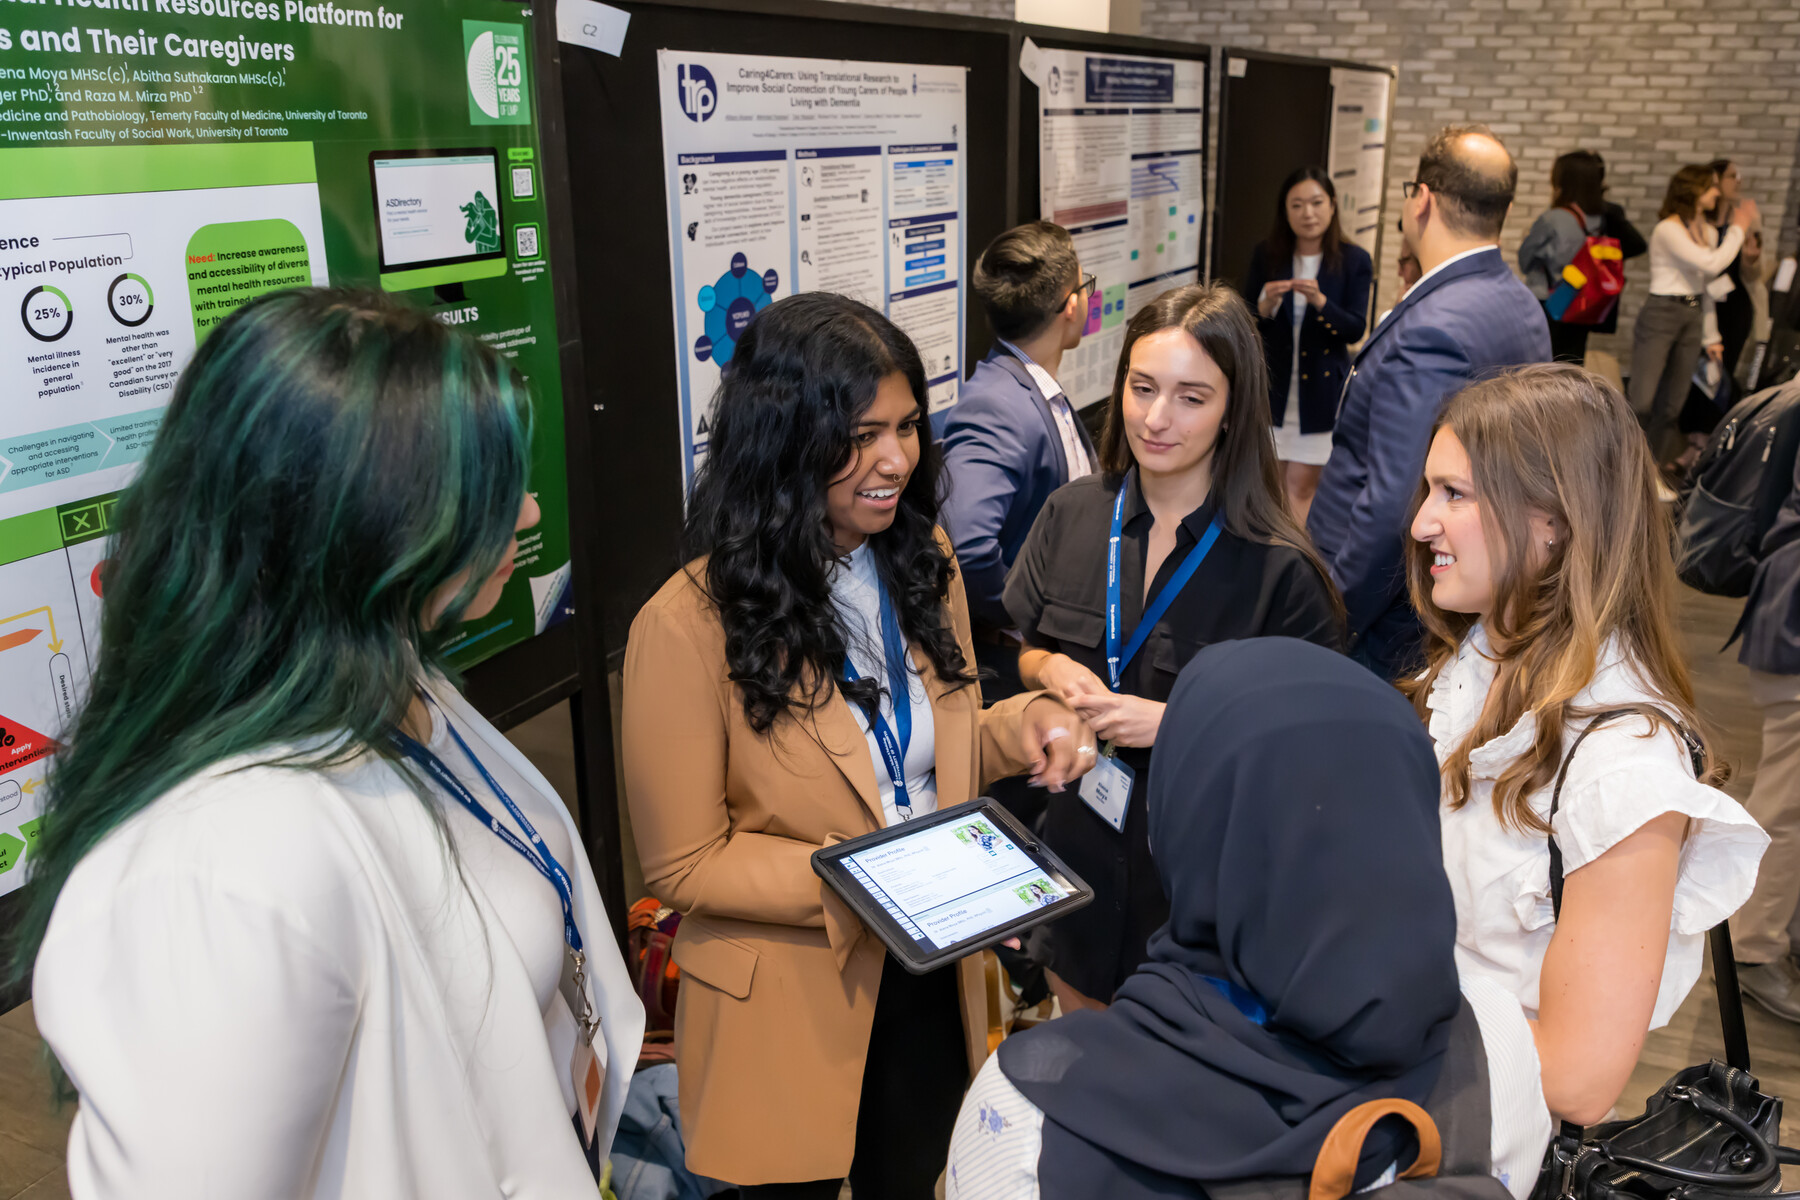 students discussing a poster at a conference